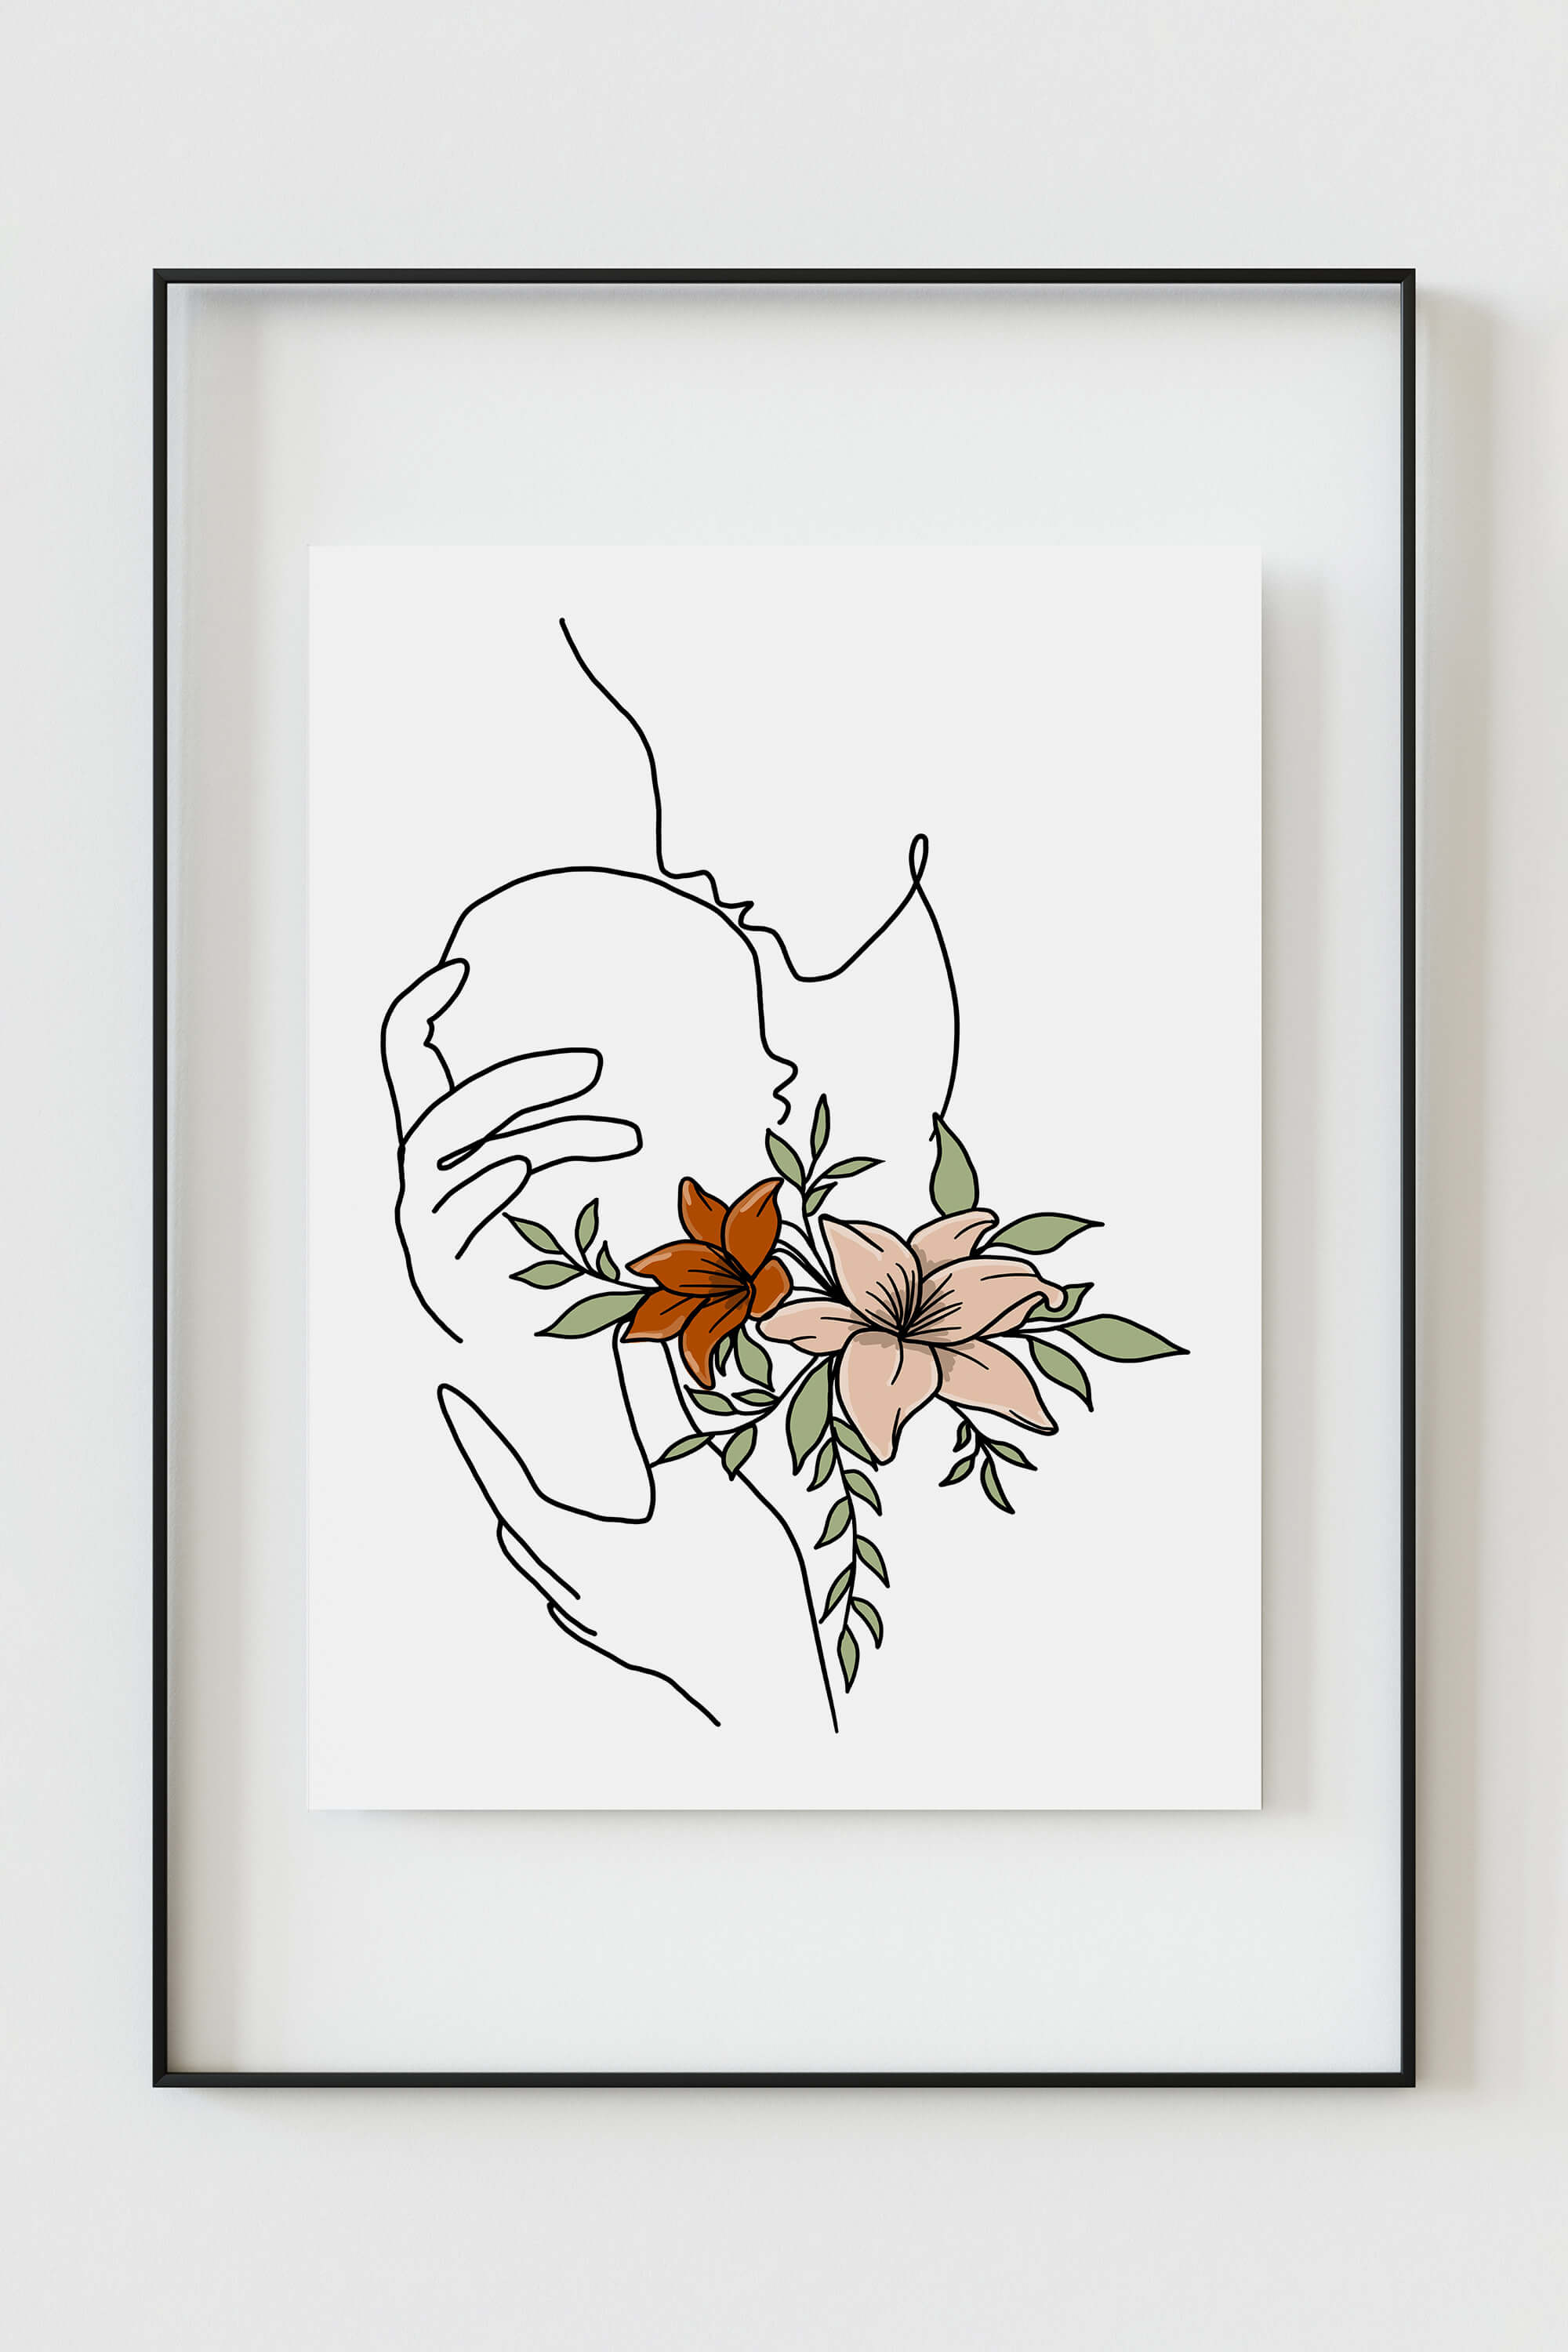 A captivating portrayal of the beauty of pregnancy, showcasing the intricate details and vivid colors. Embrace the joy and wonder of impending motherhood with this unique art print.